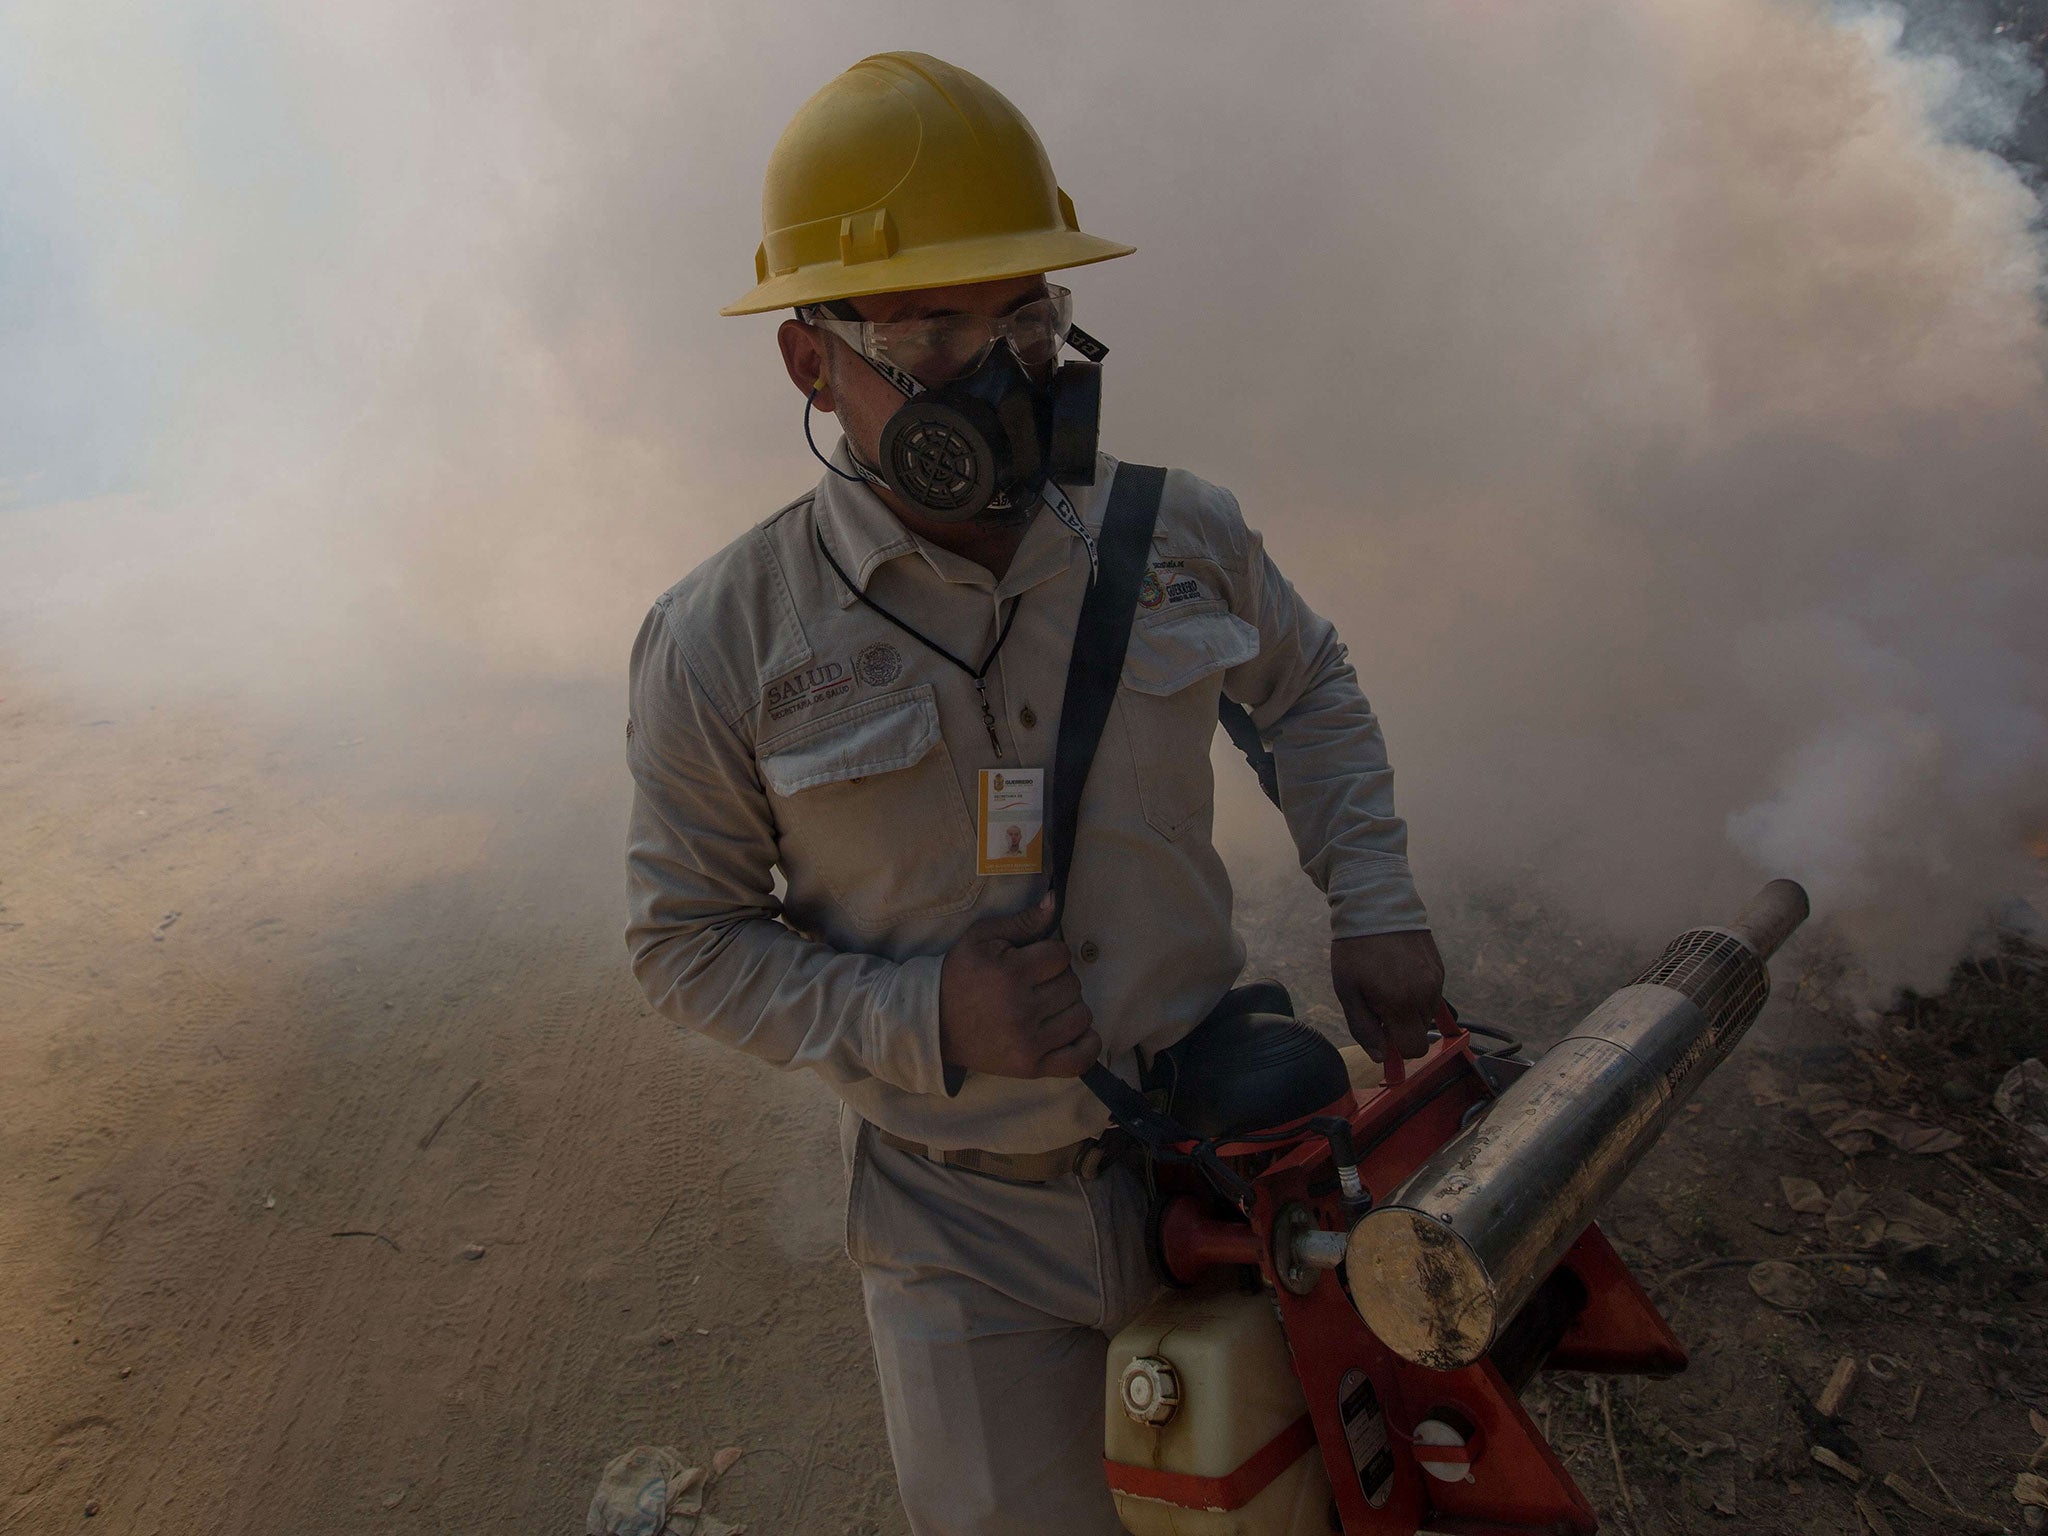 A health worker fumigates in Mexico